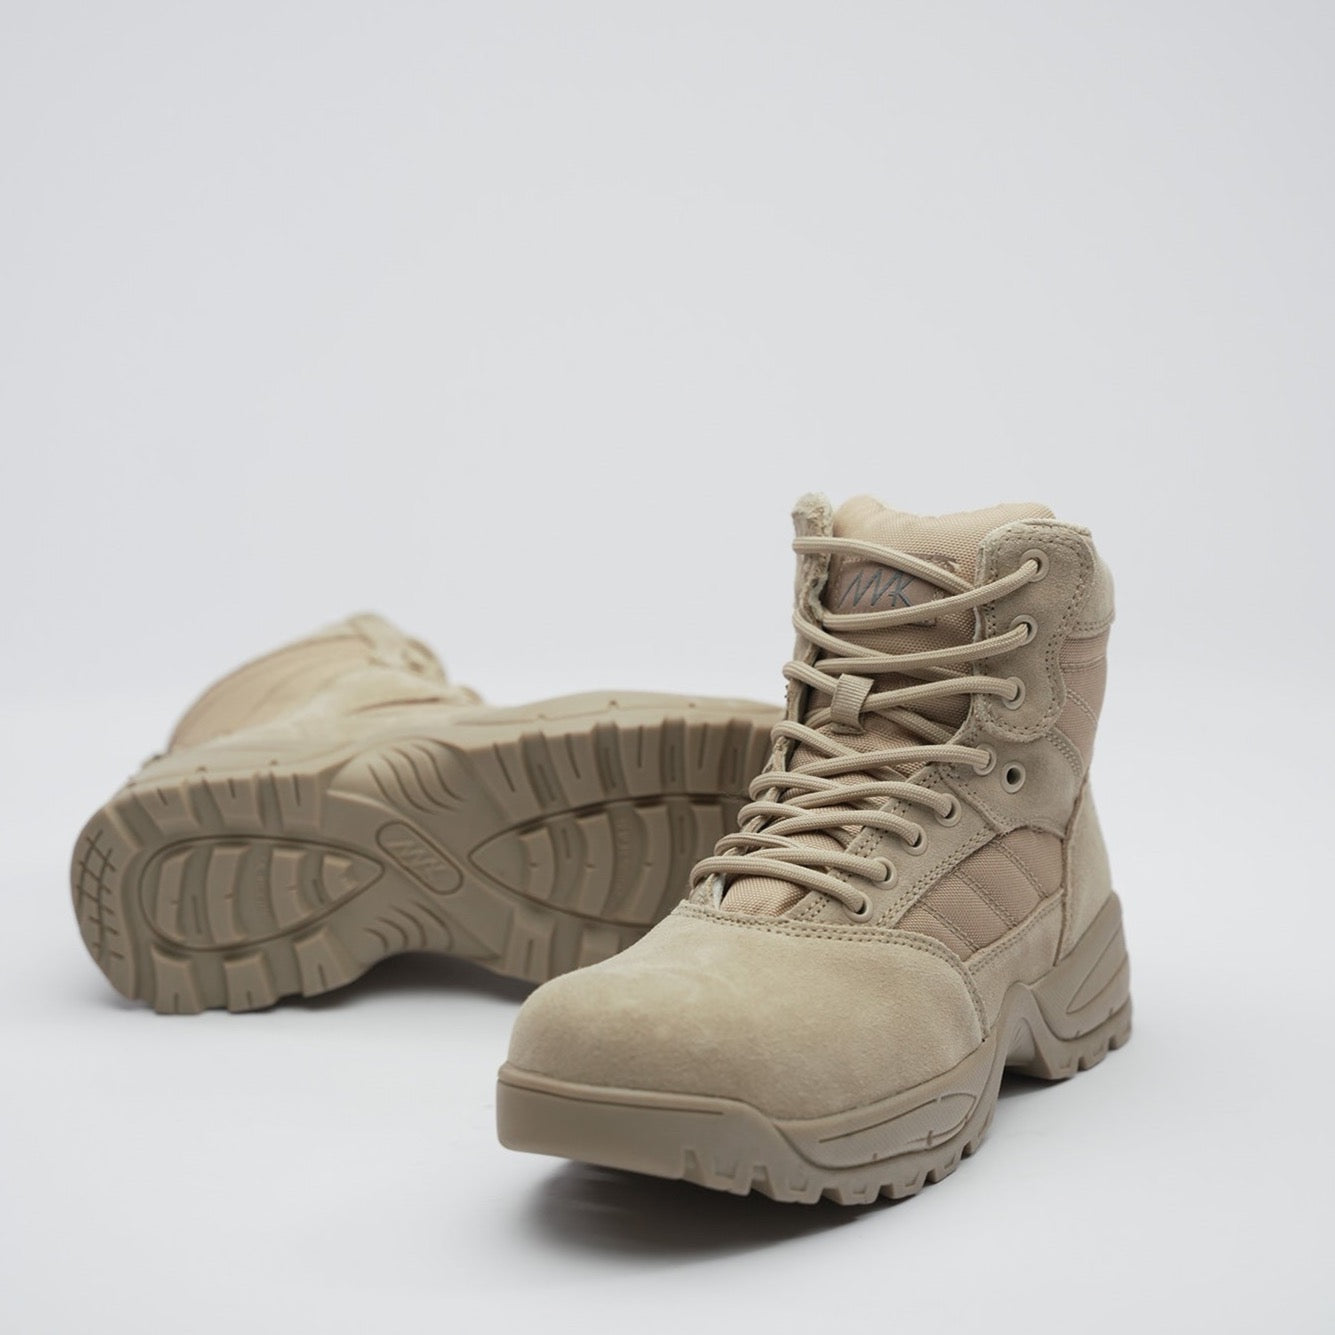 mens desert tan suede military boots